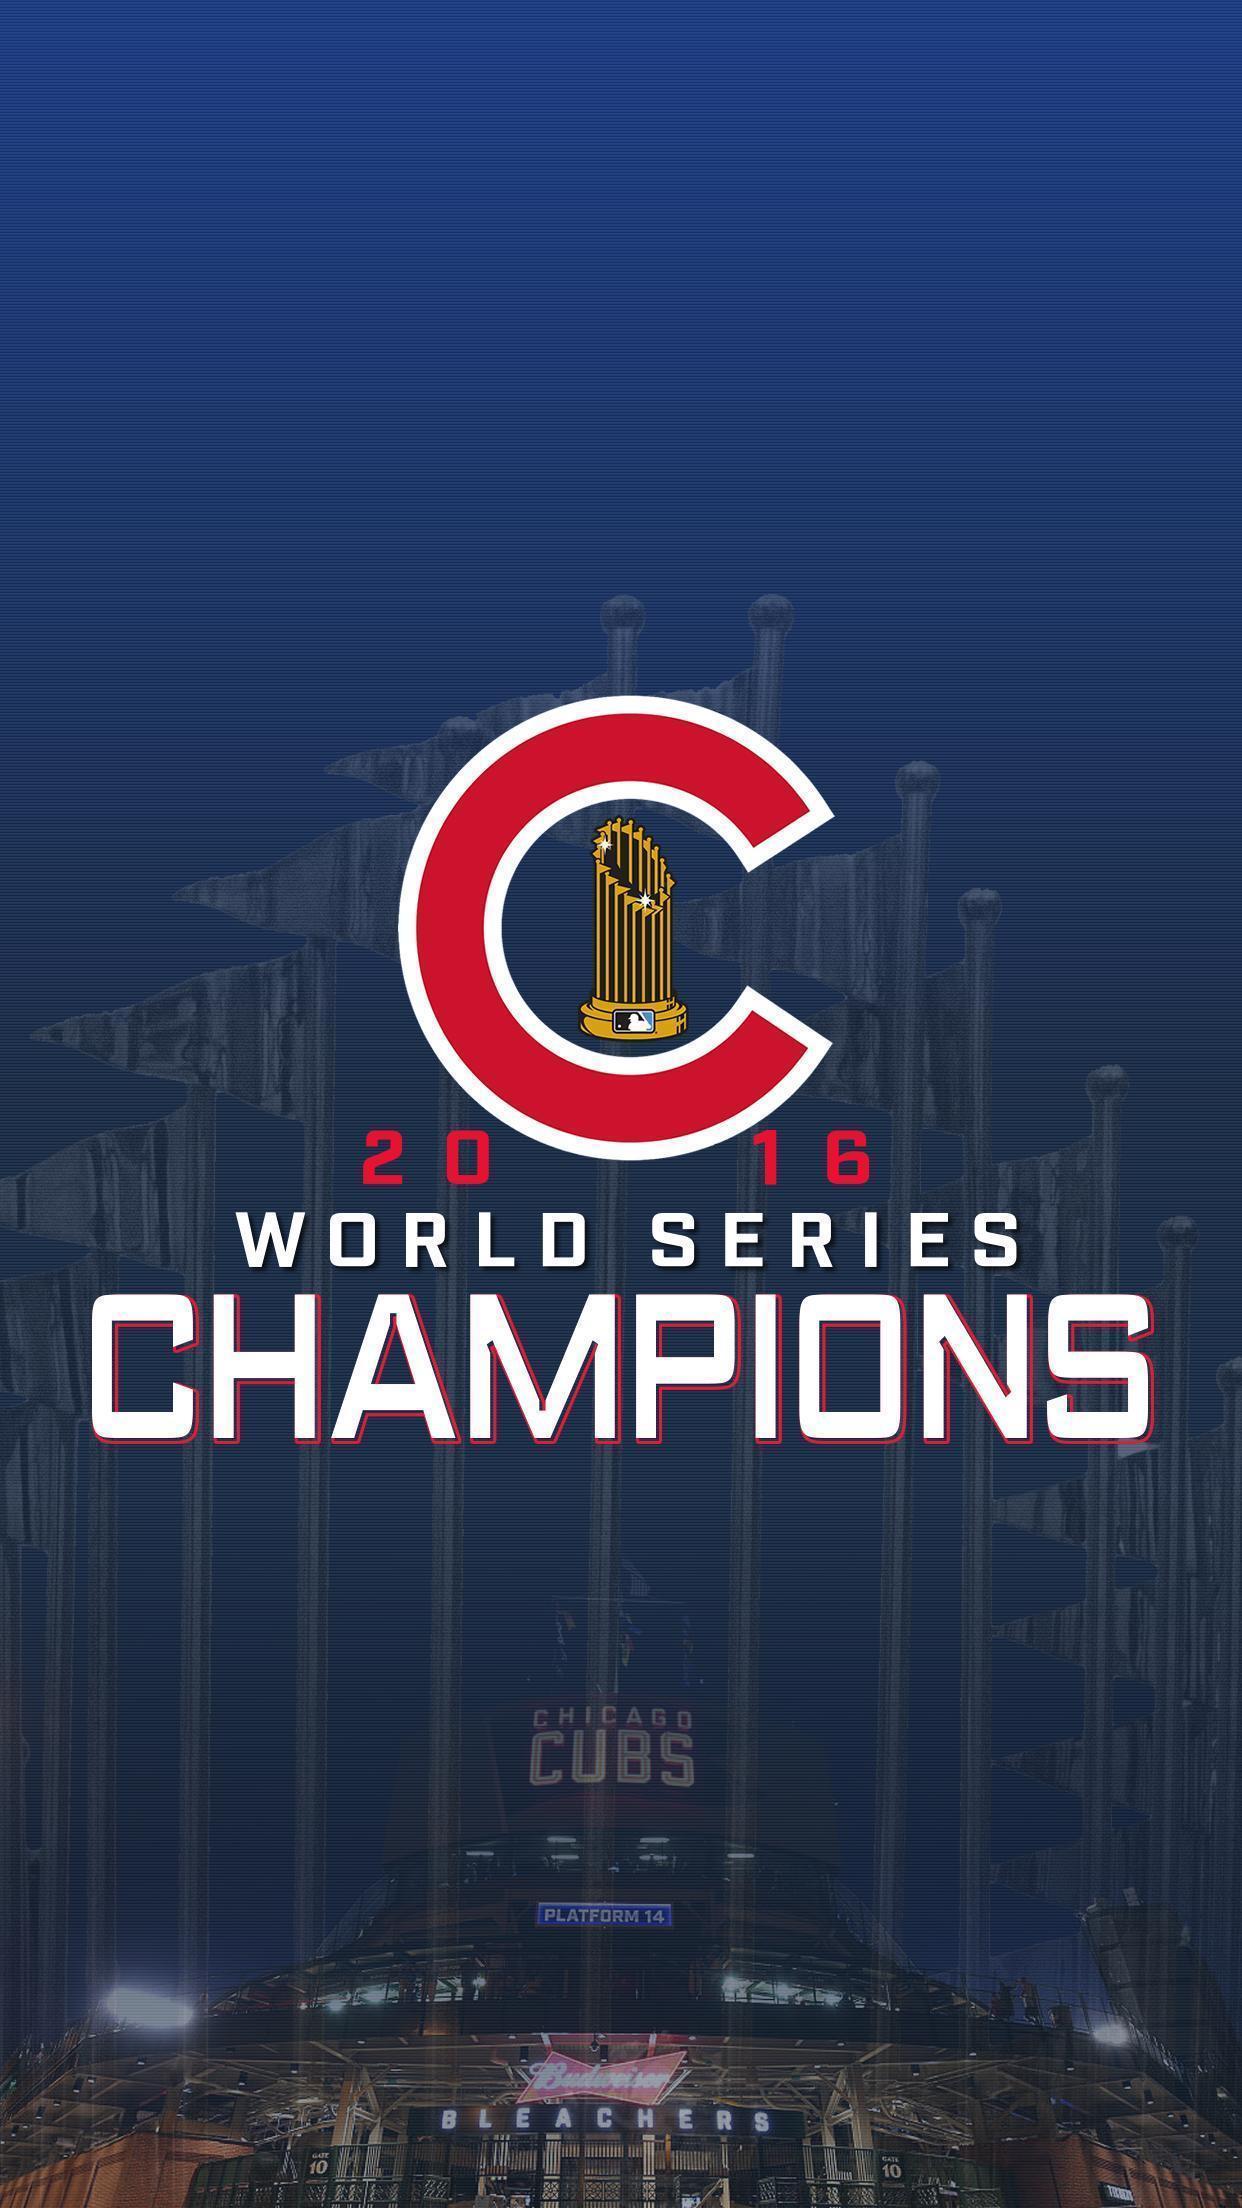 Someone asked for a iPhone Wallpaper of the C and trophy. Here